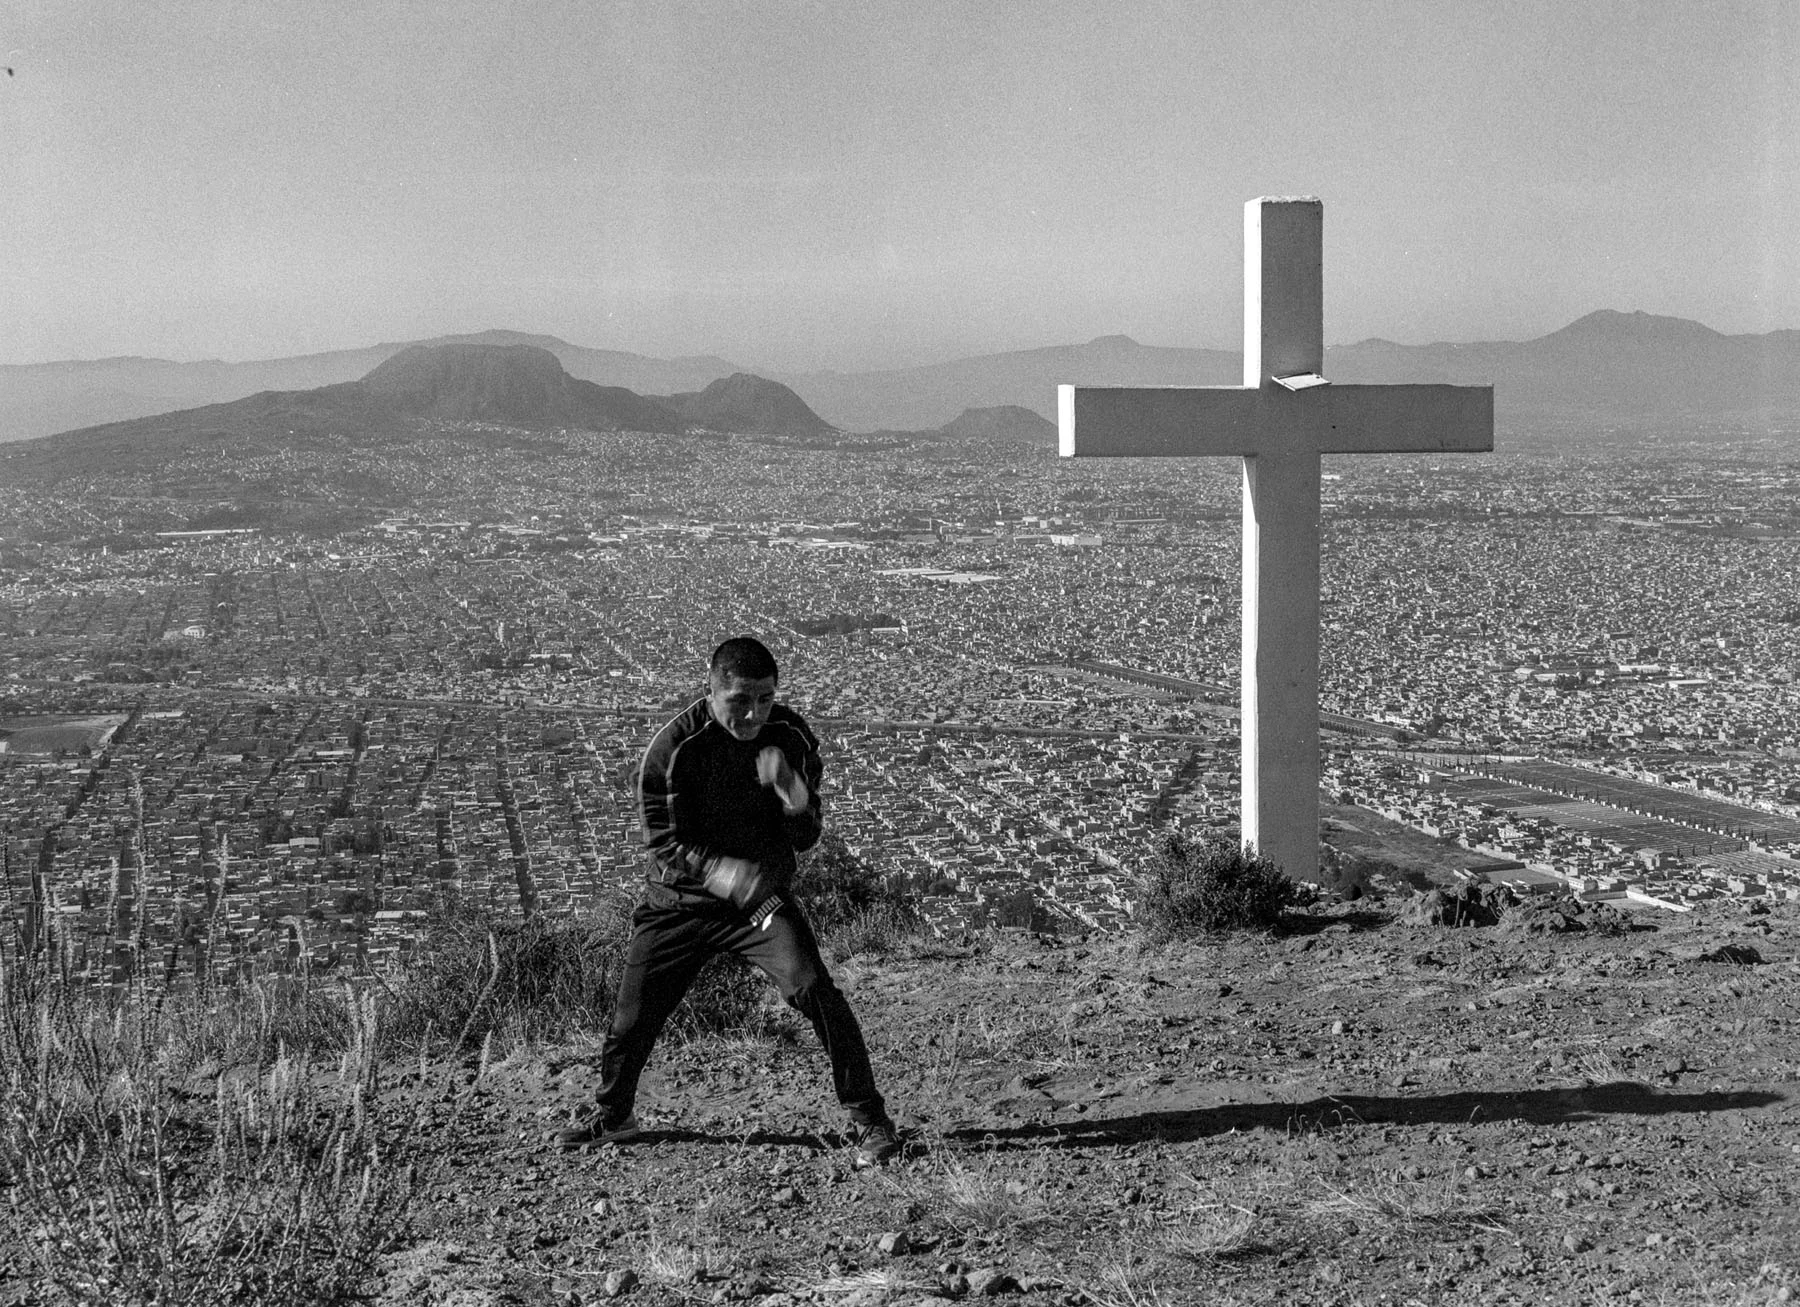 A video of boxer Salvador “El Pelon” Juárez shadow boxing in front of a cross that overlooks his hometown of Chimalhuacán, Mexico.